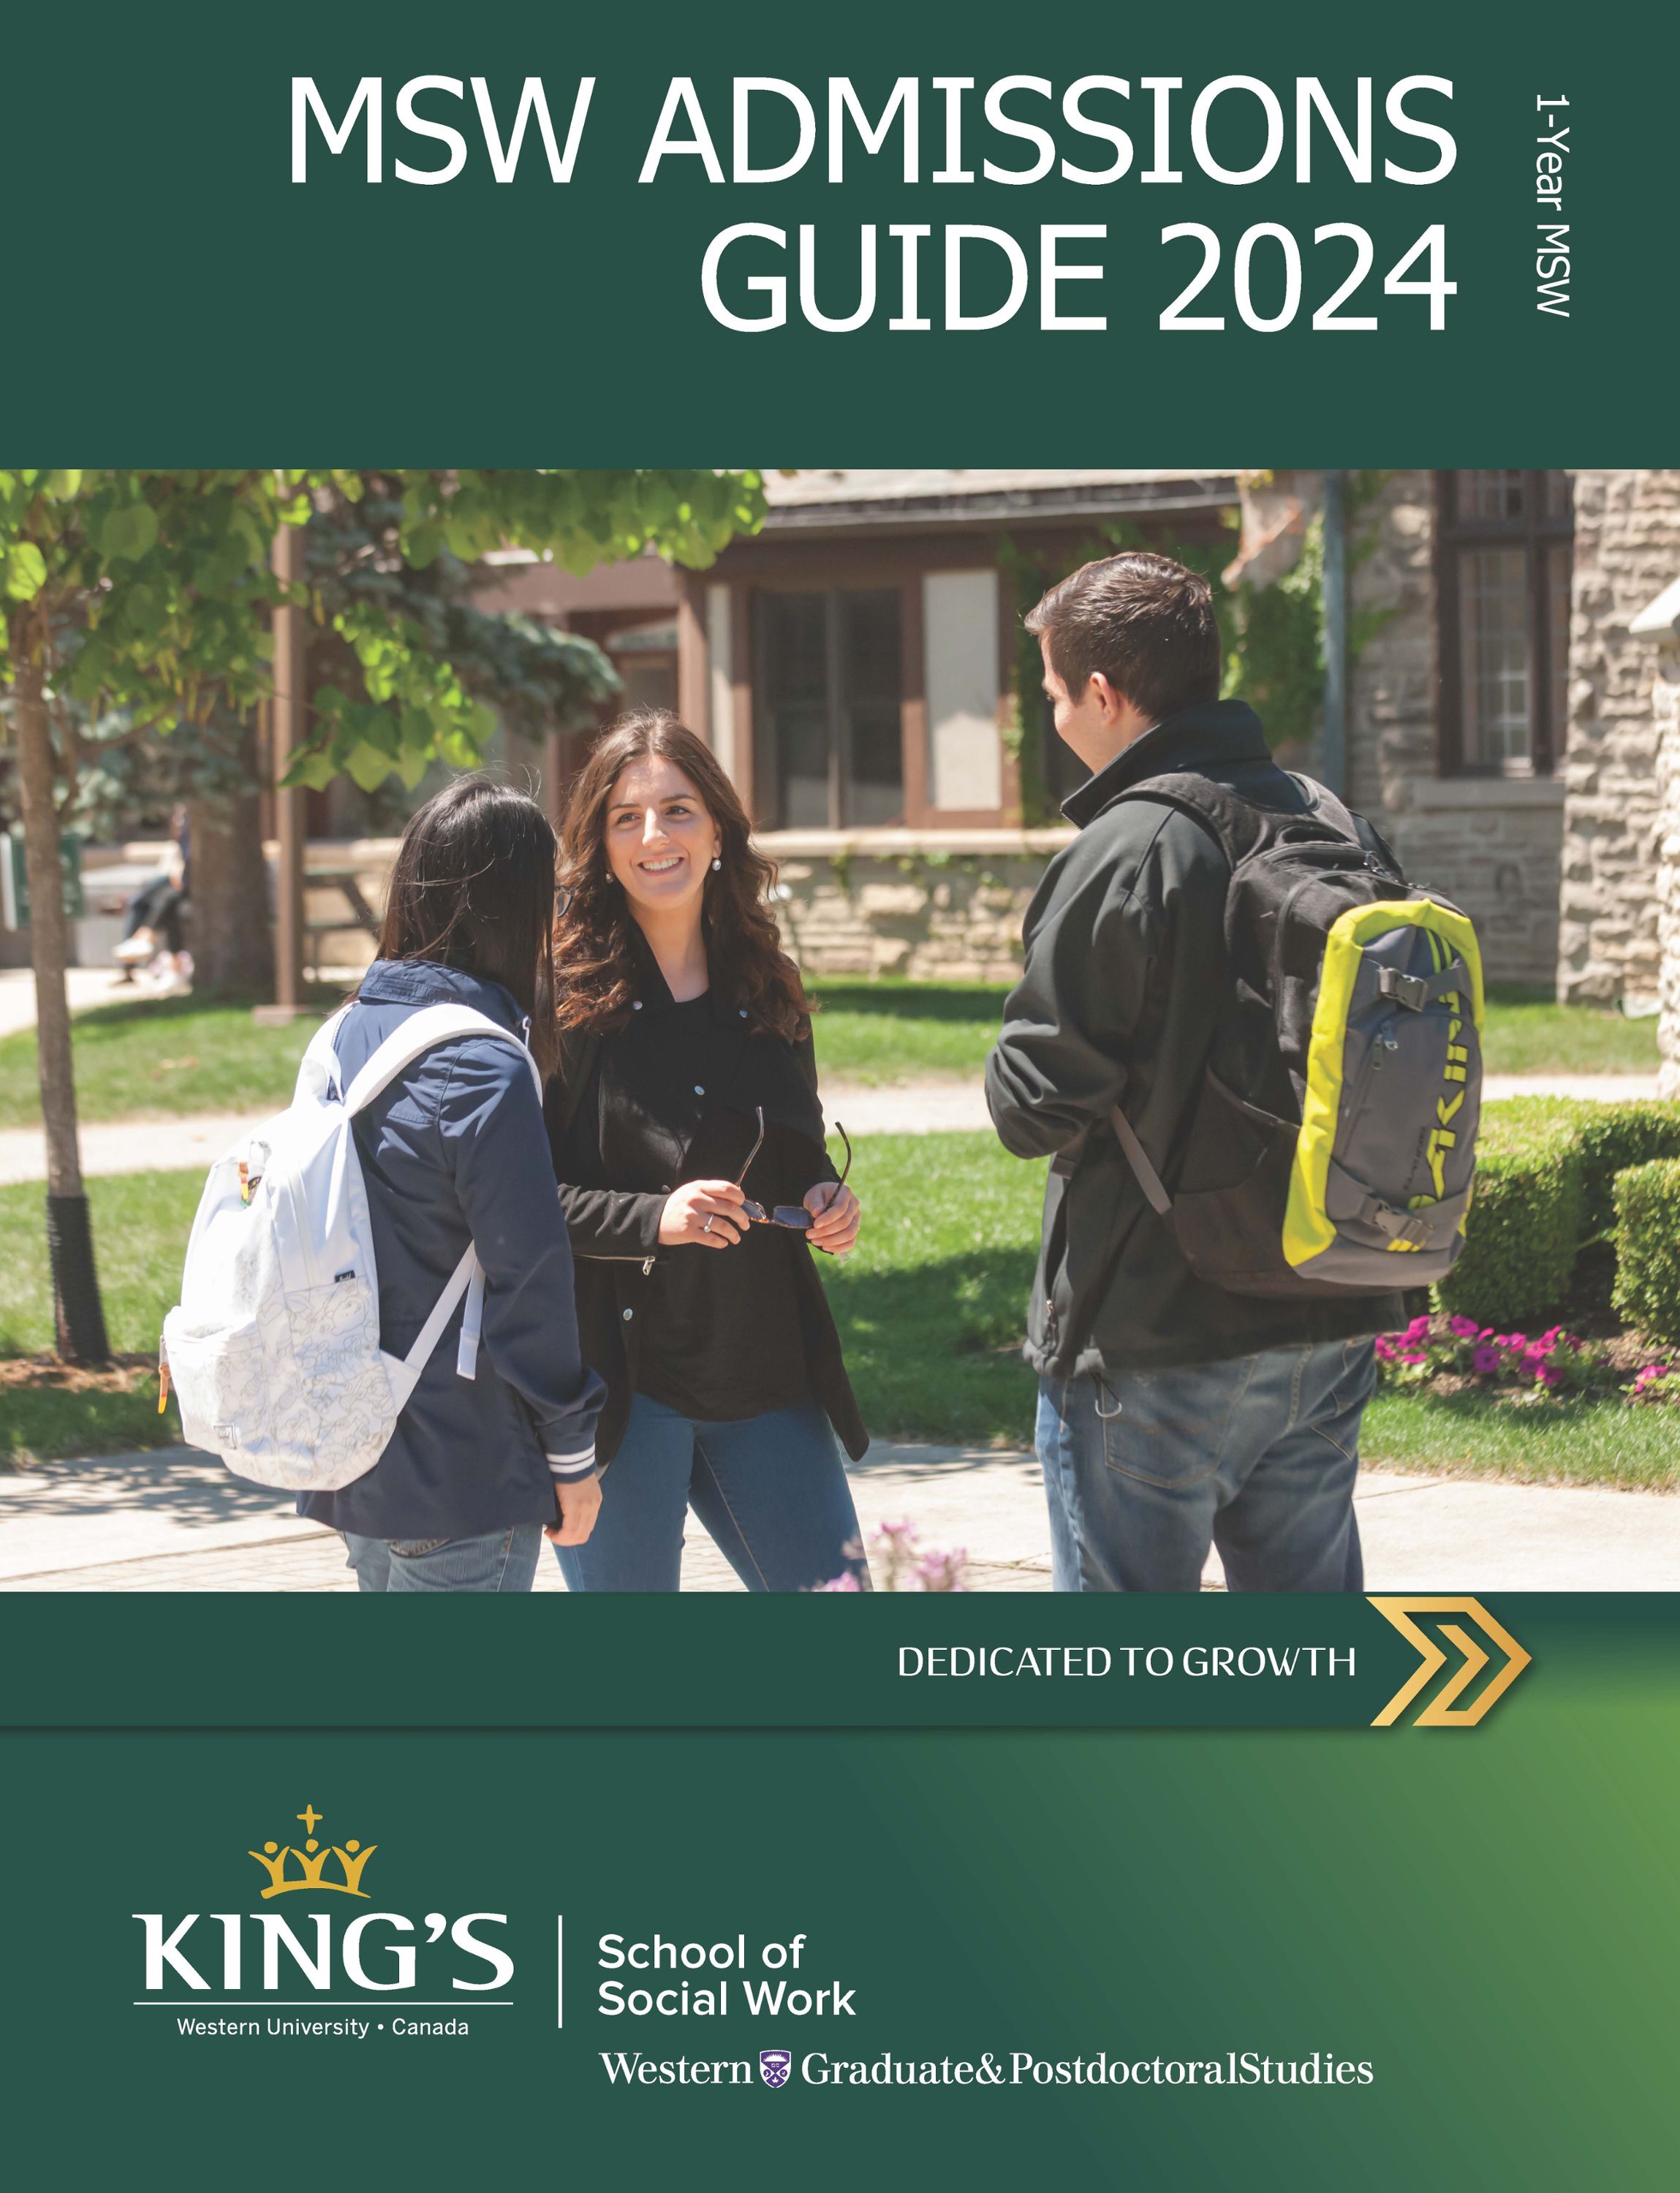 1-Year MSW Admissions Guide Download